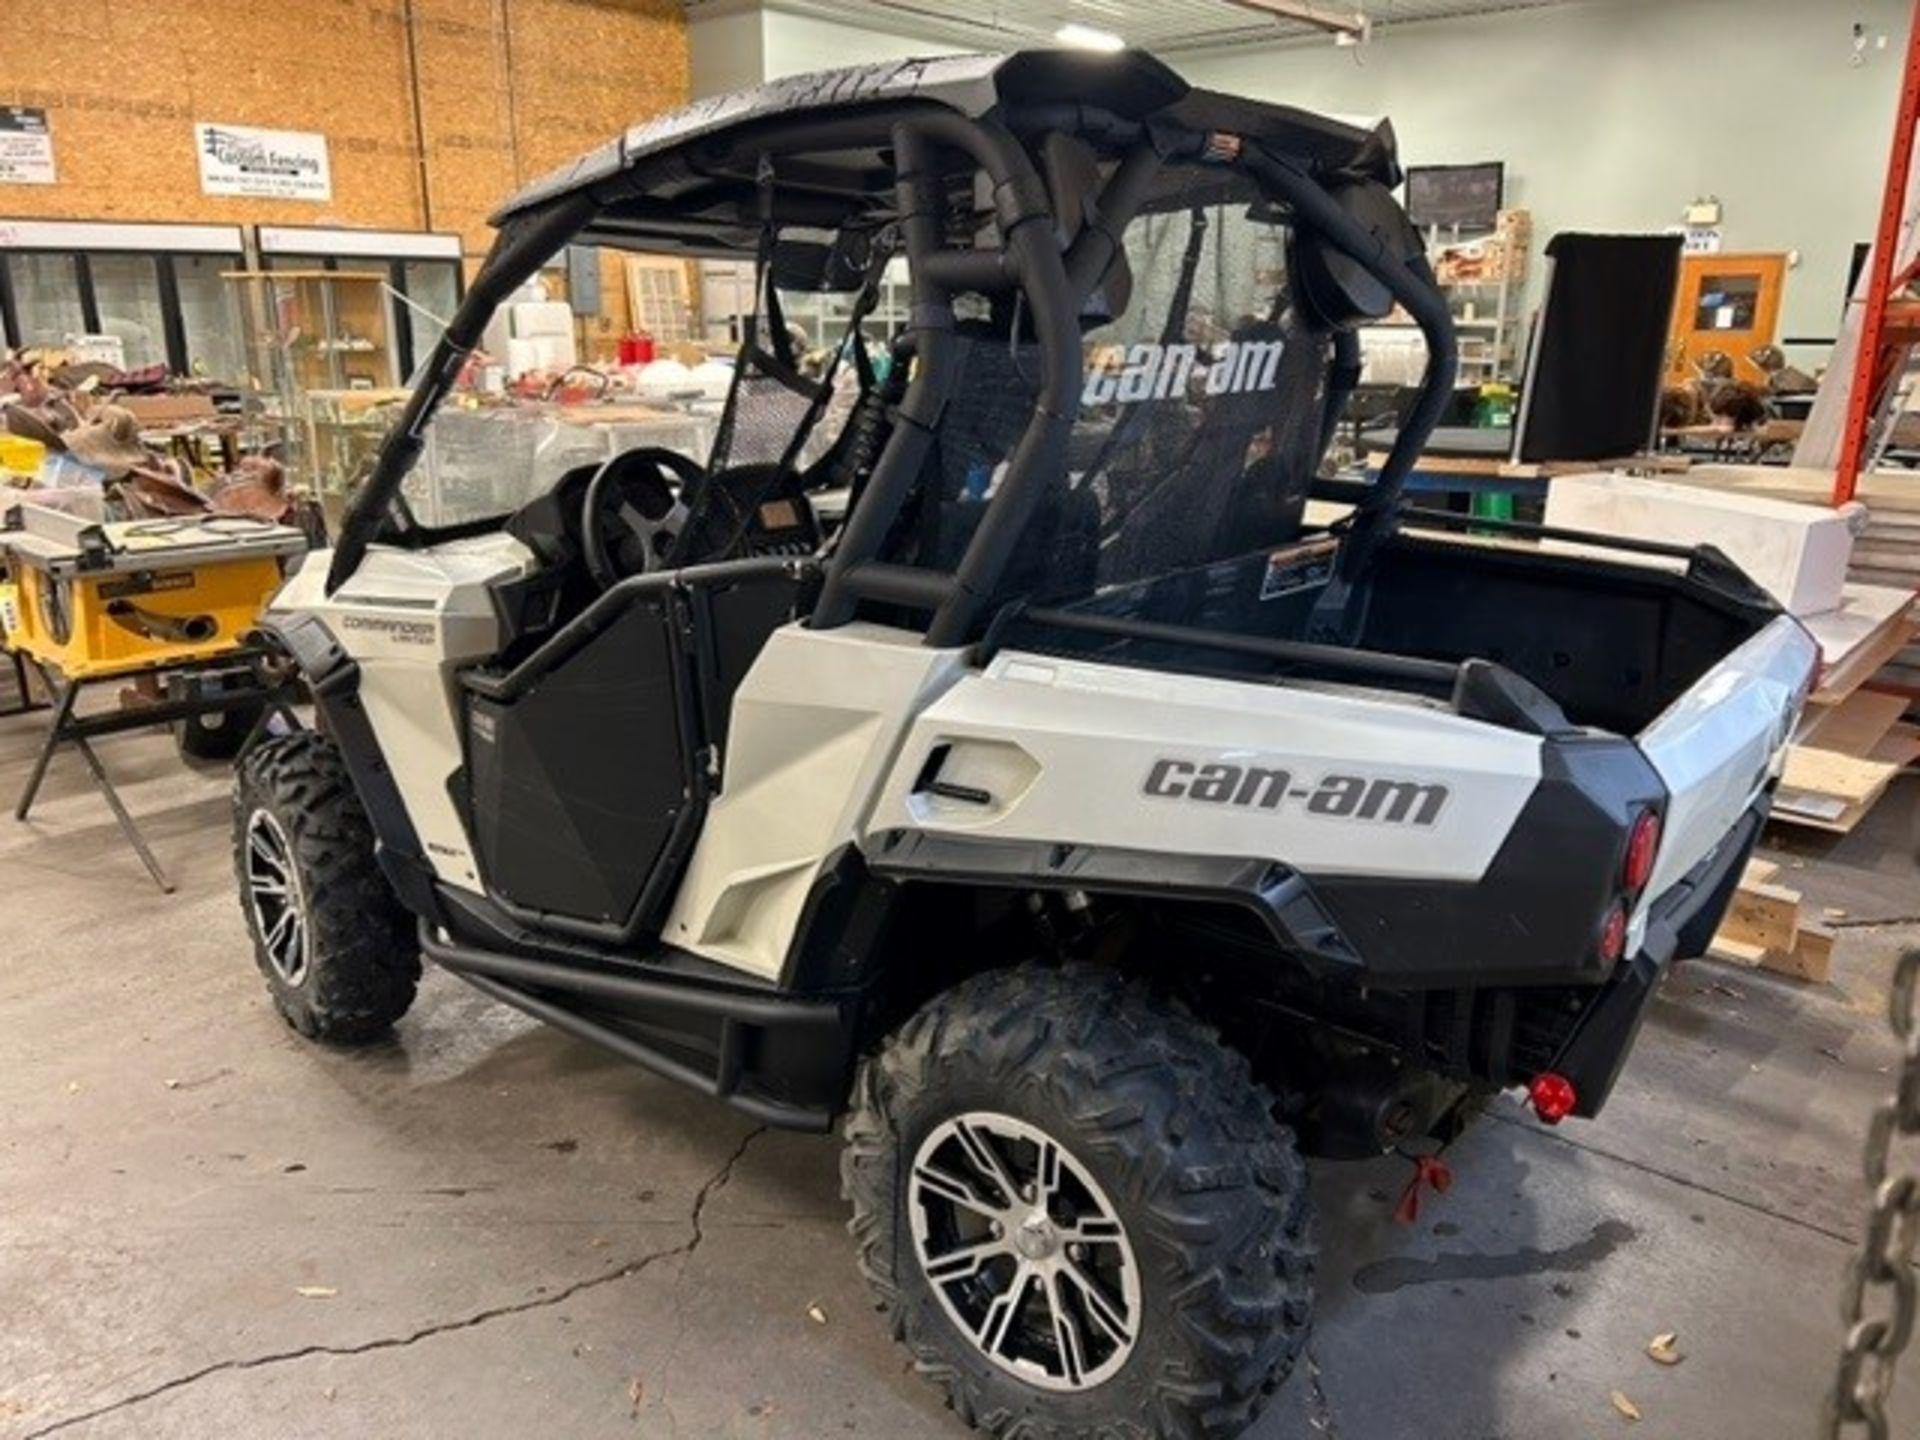 *OFFSITE - LOCATED AT MAS* 2014 CAN-AM COMMANDER 1000 LIMITED W/GPS - Image 3 of 11